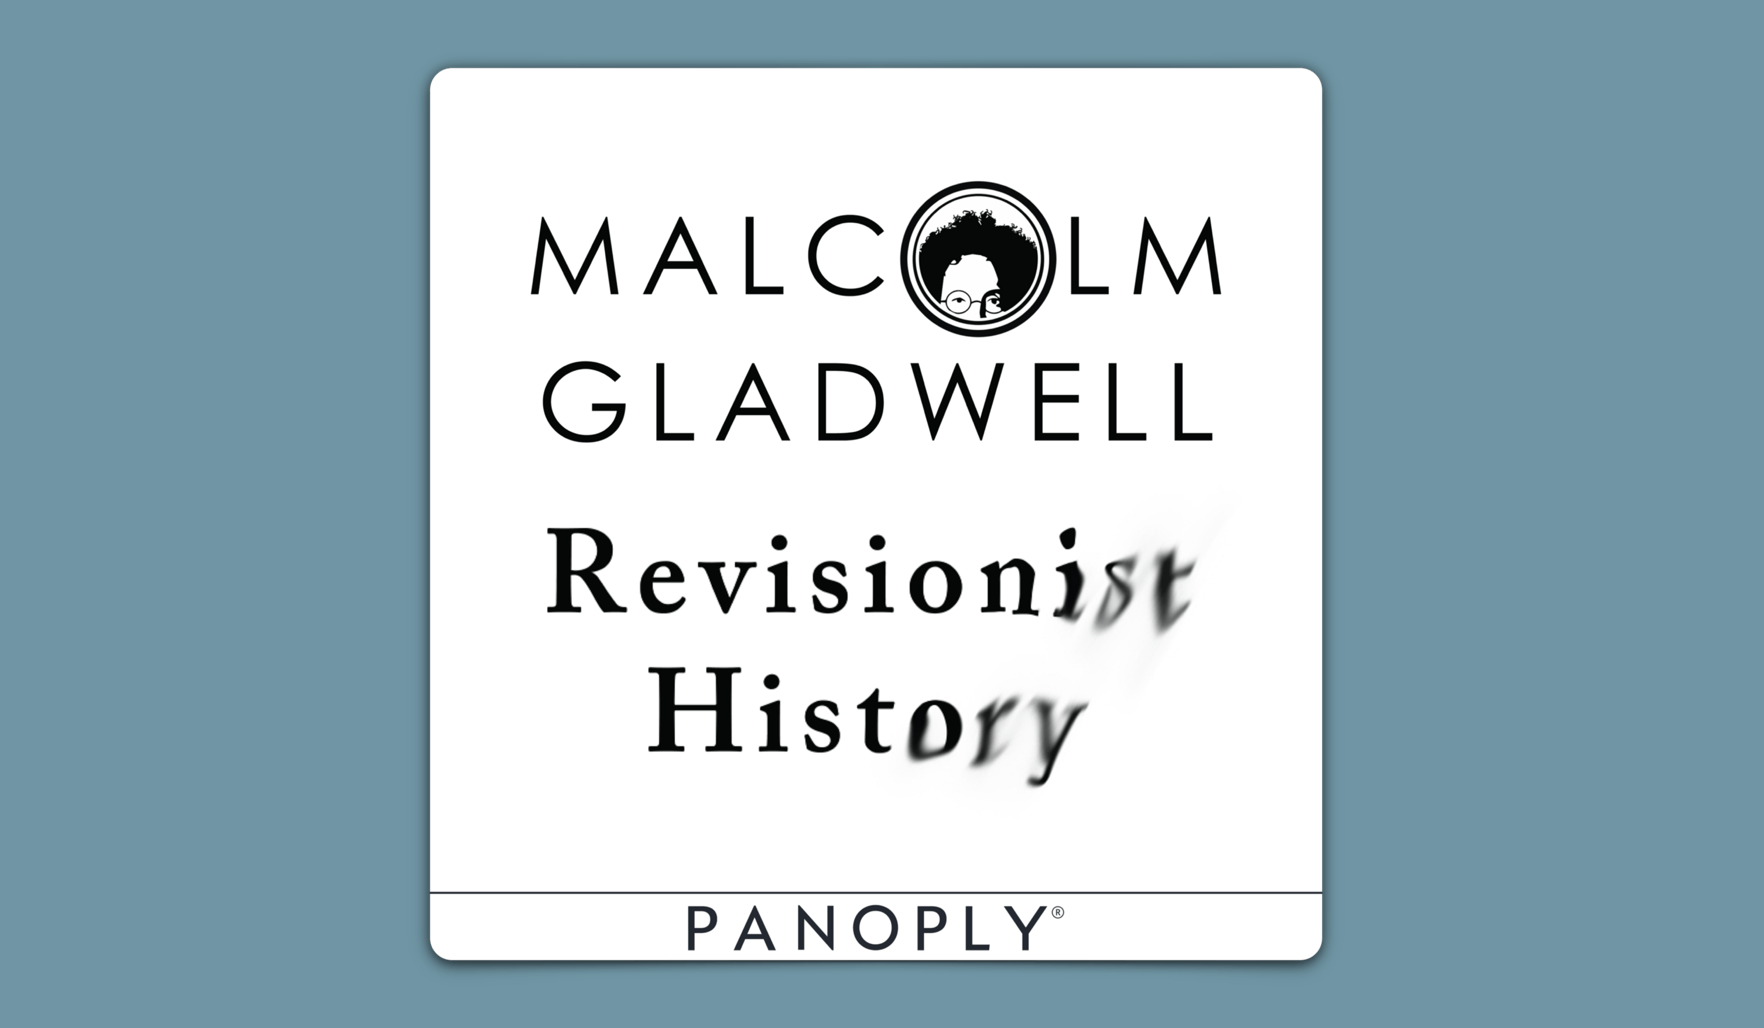 Malcolm Gladwell Revisionist History